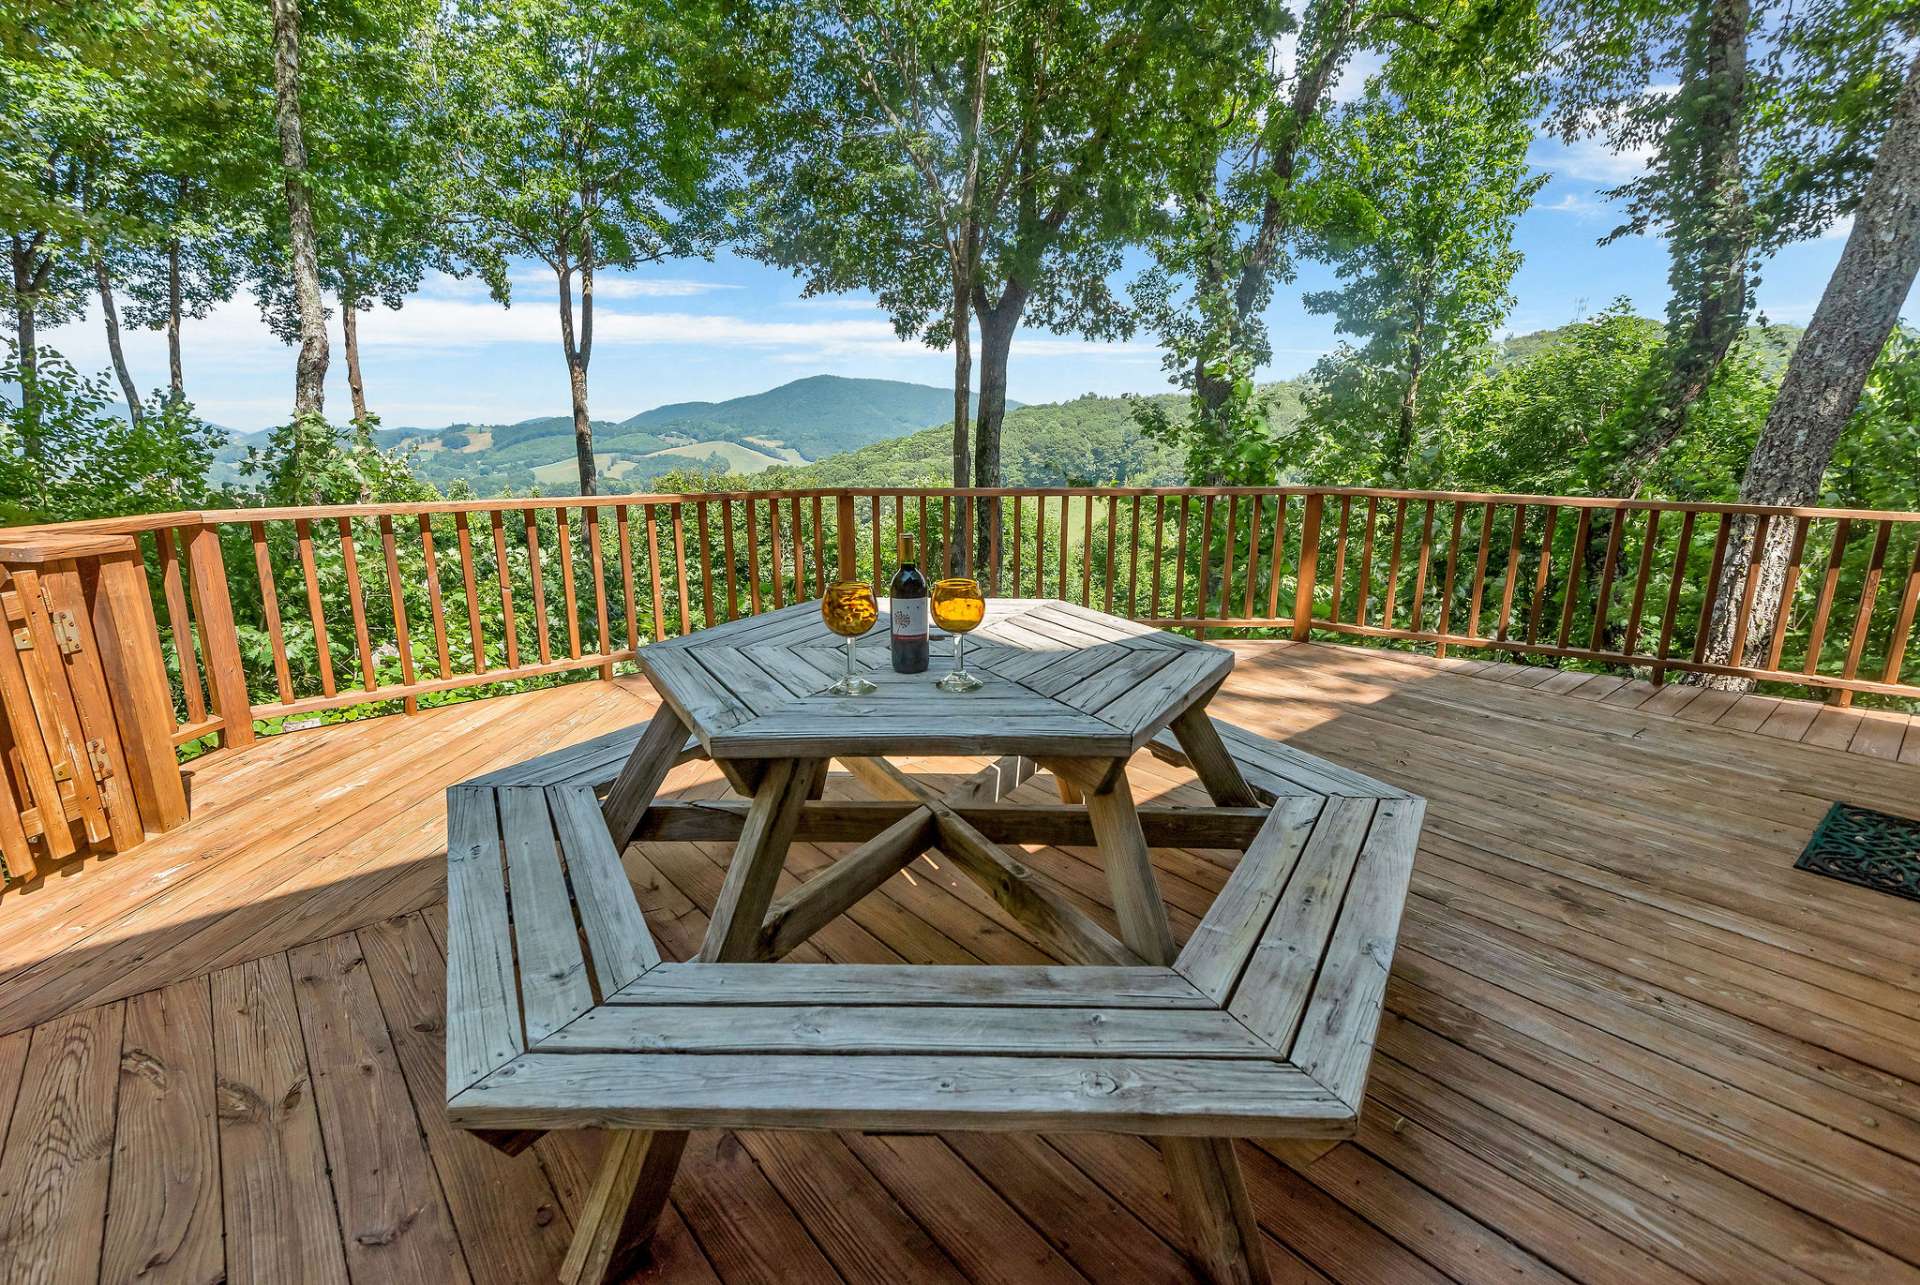 This mountain vista view is a romantic's dream.